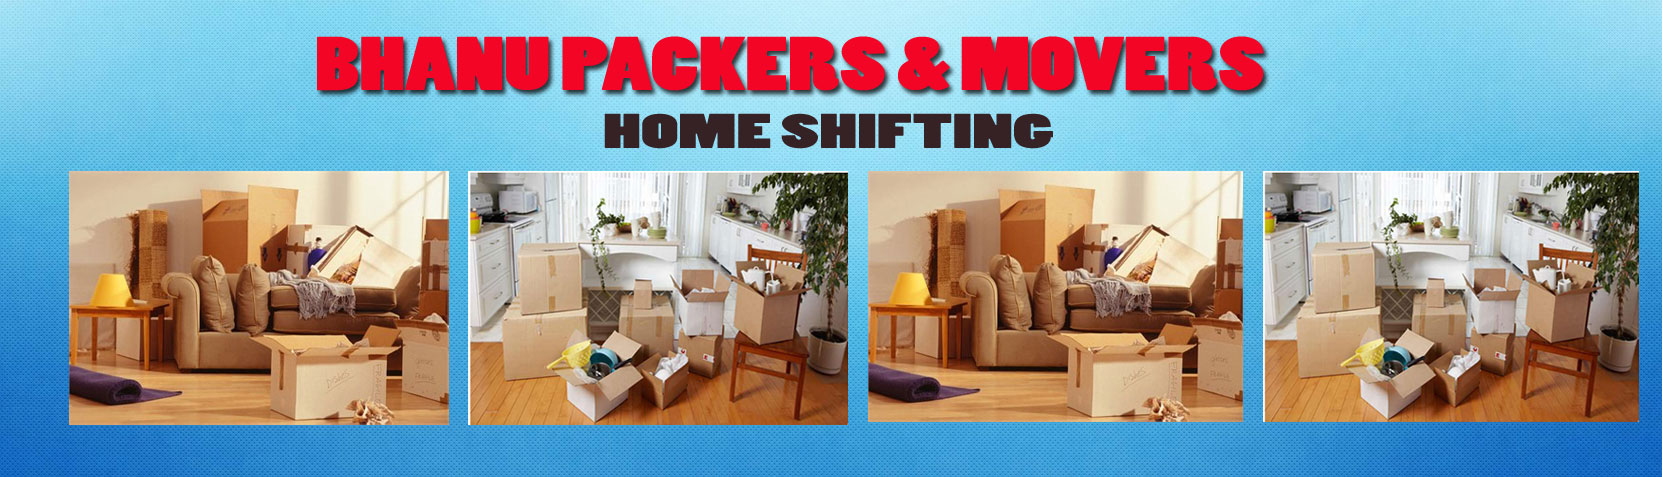 Home Shifting Services by Bhanu Packers & Movers Noida